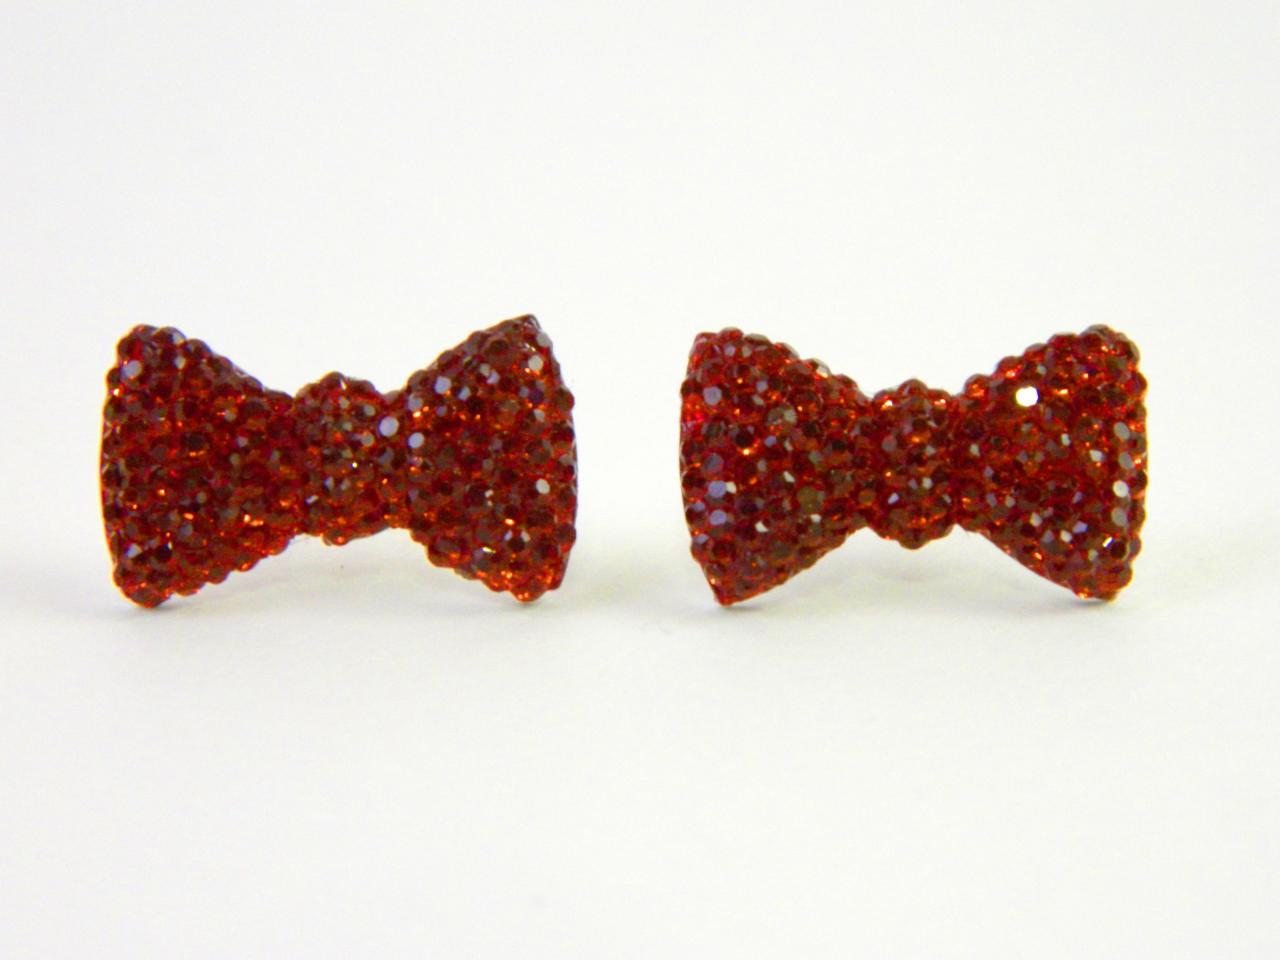 Doctor Who Bowties Are Cool Earrings